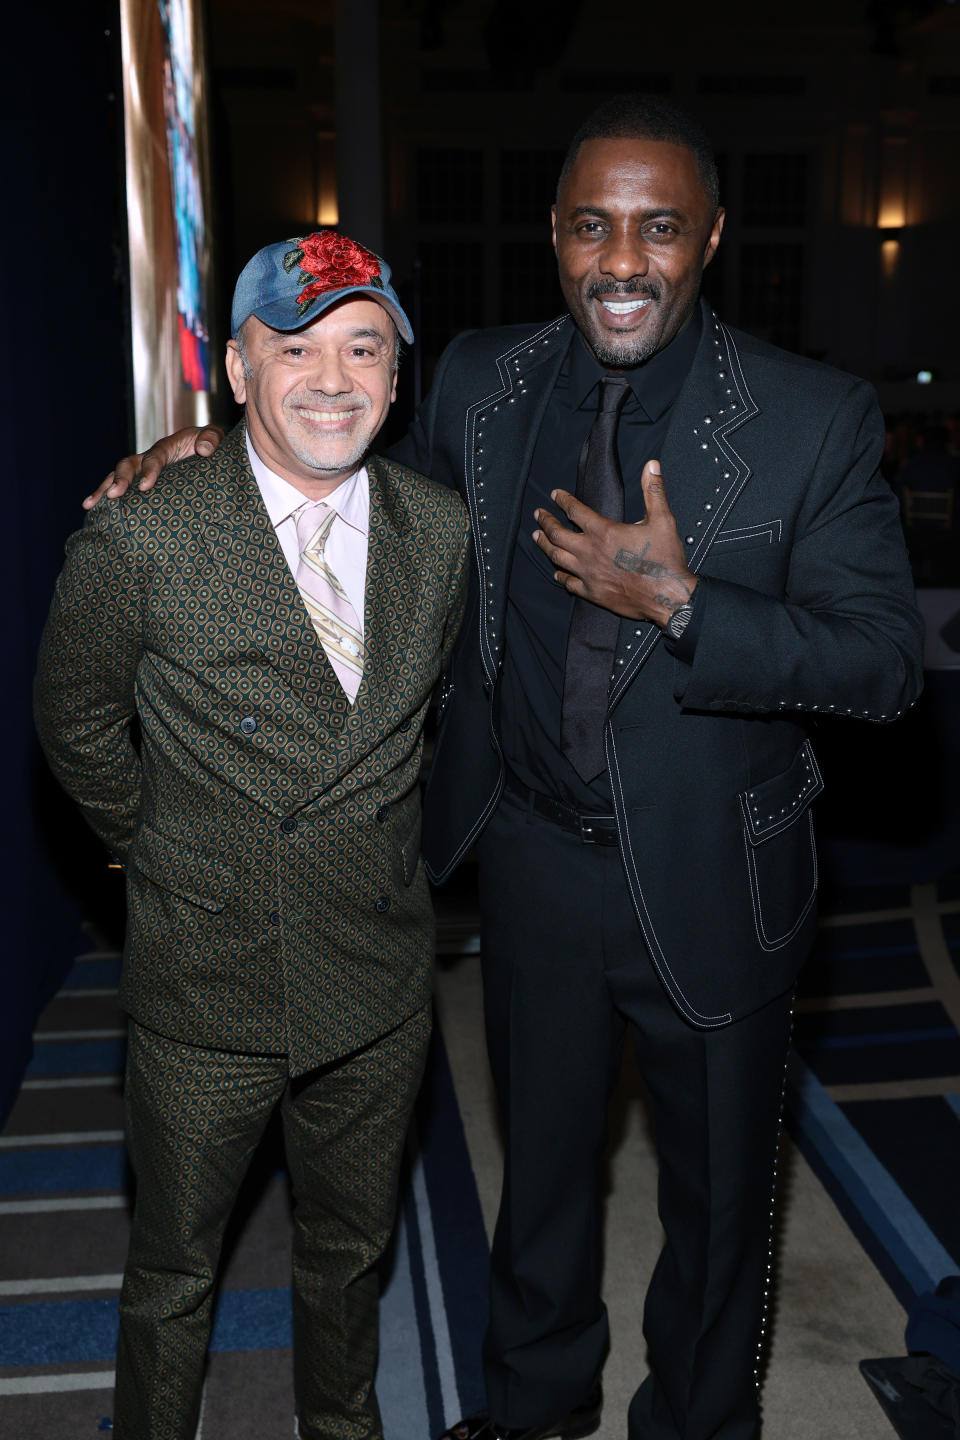 Christian Louboutin and Idris Elba backstage at the 2022 FNAAs. - Credit: Footwear News via Getty Images